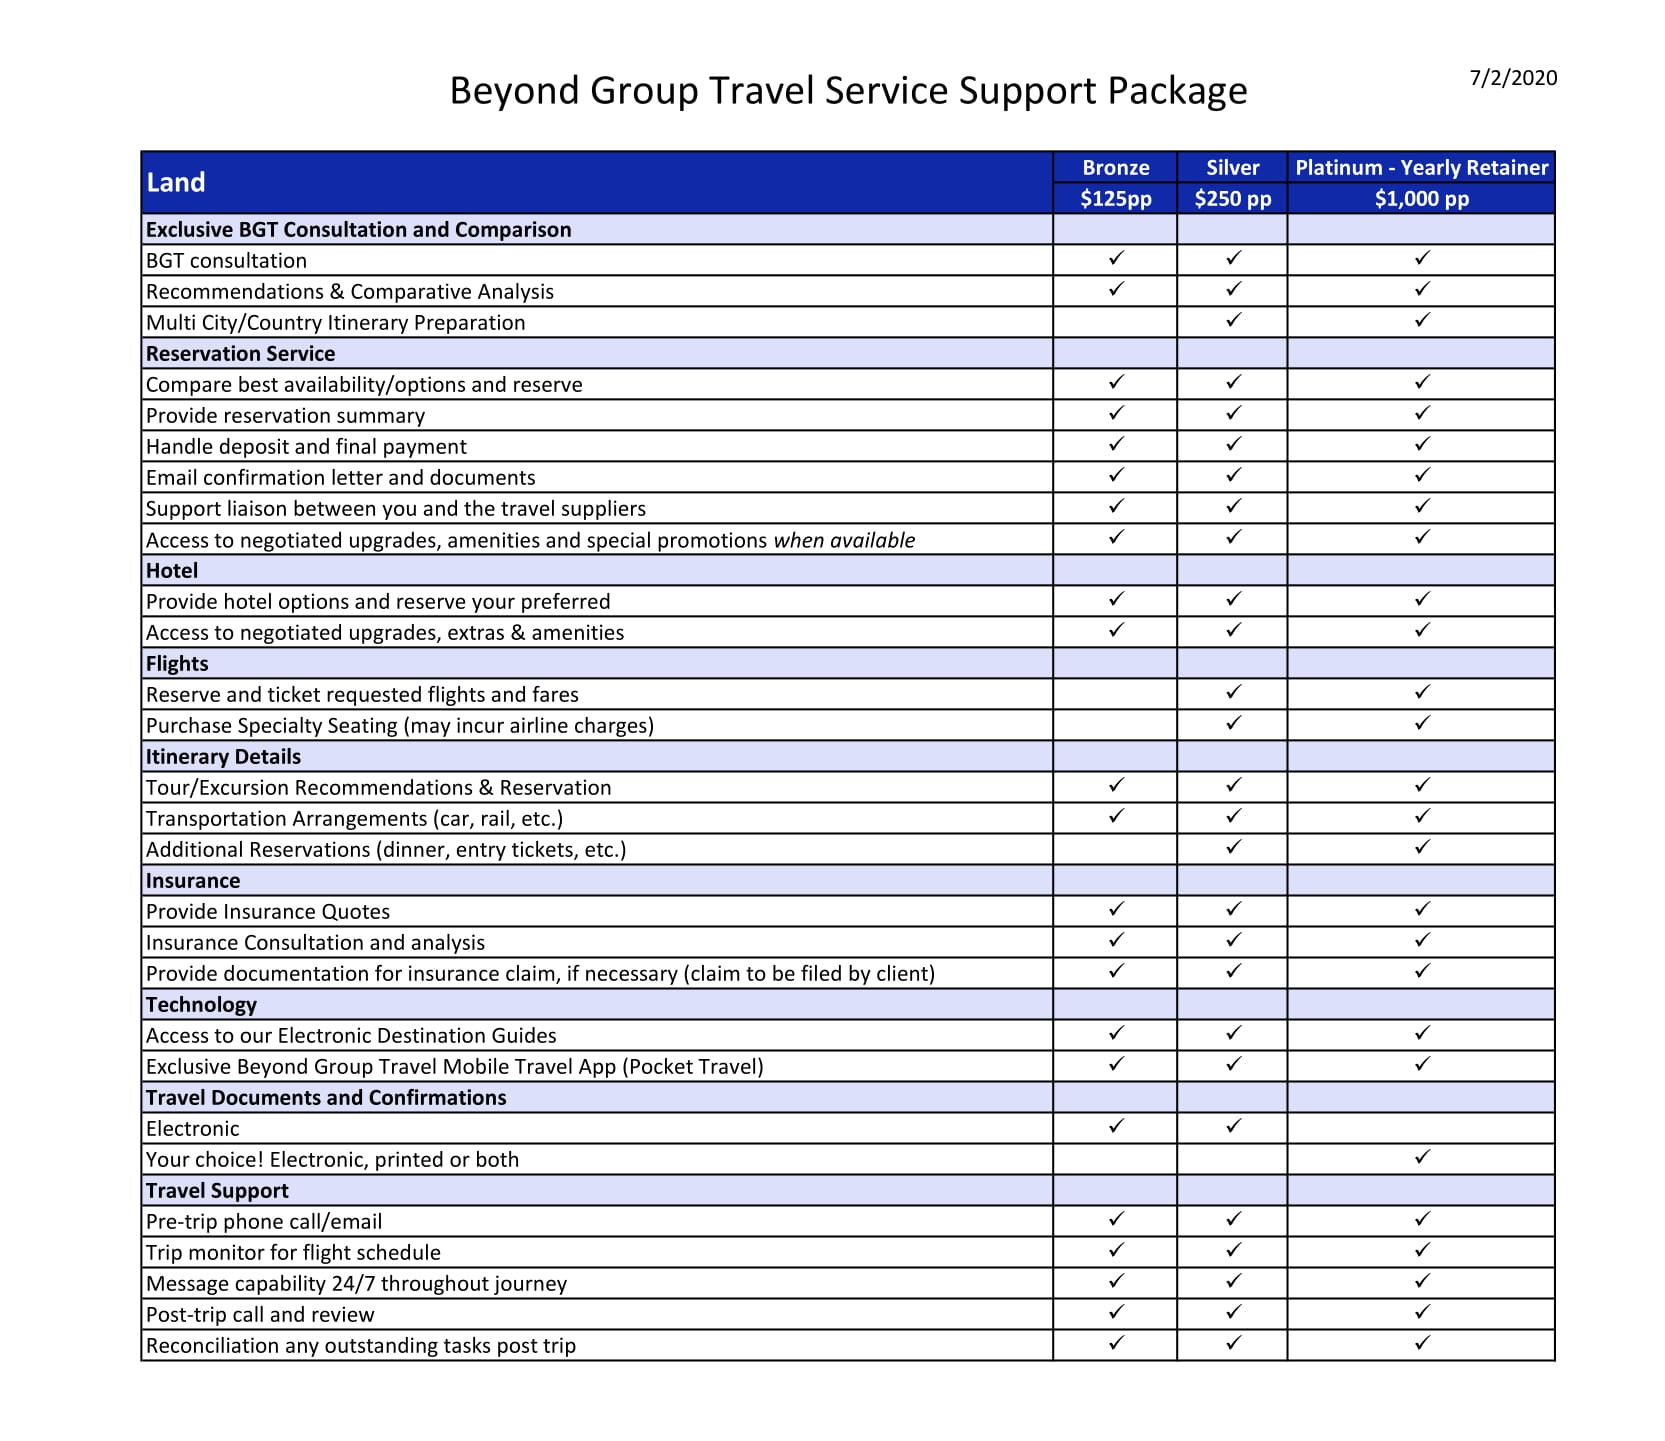 Beyond Group Travel Service & Support Package - Land Itinerary